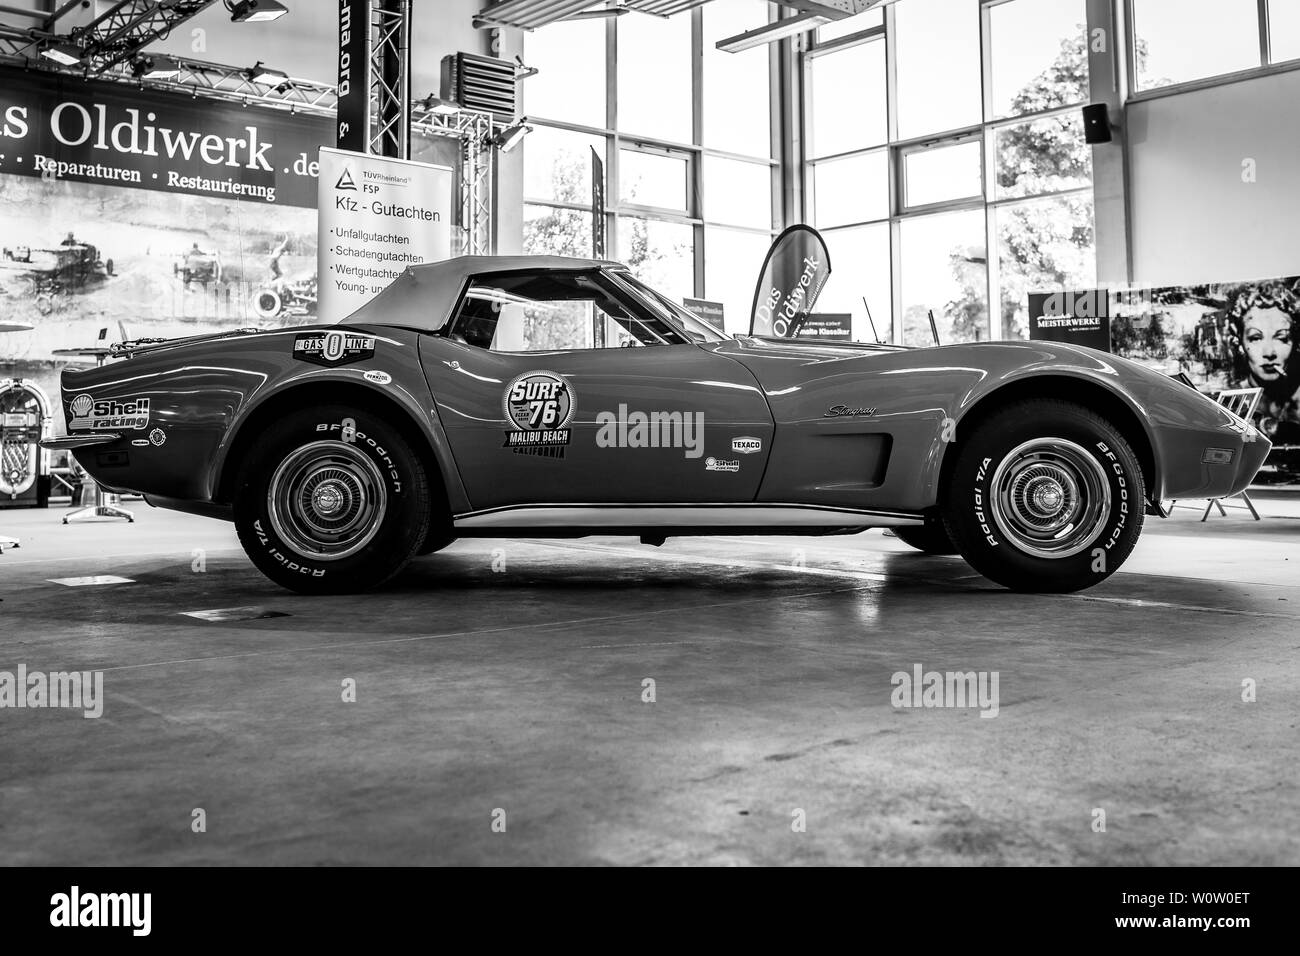 PAAREN IM GLIEN, GERMANY - MAY 19, 2018: The sports car Chevrolet Corvette Stingray (C3), 1973. Black and white. Die Oldtimer Show 2018. Stock Photo